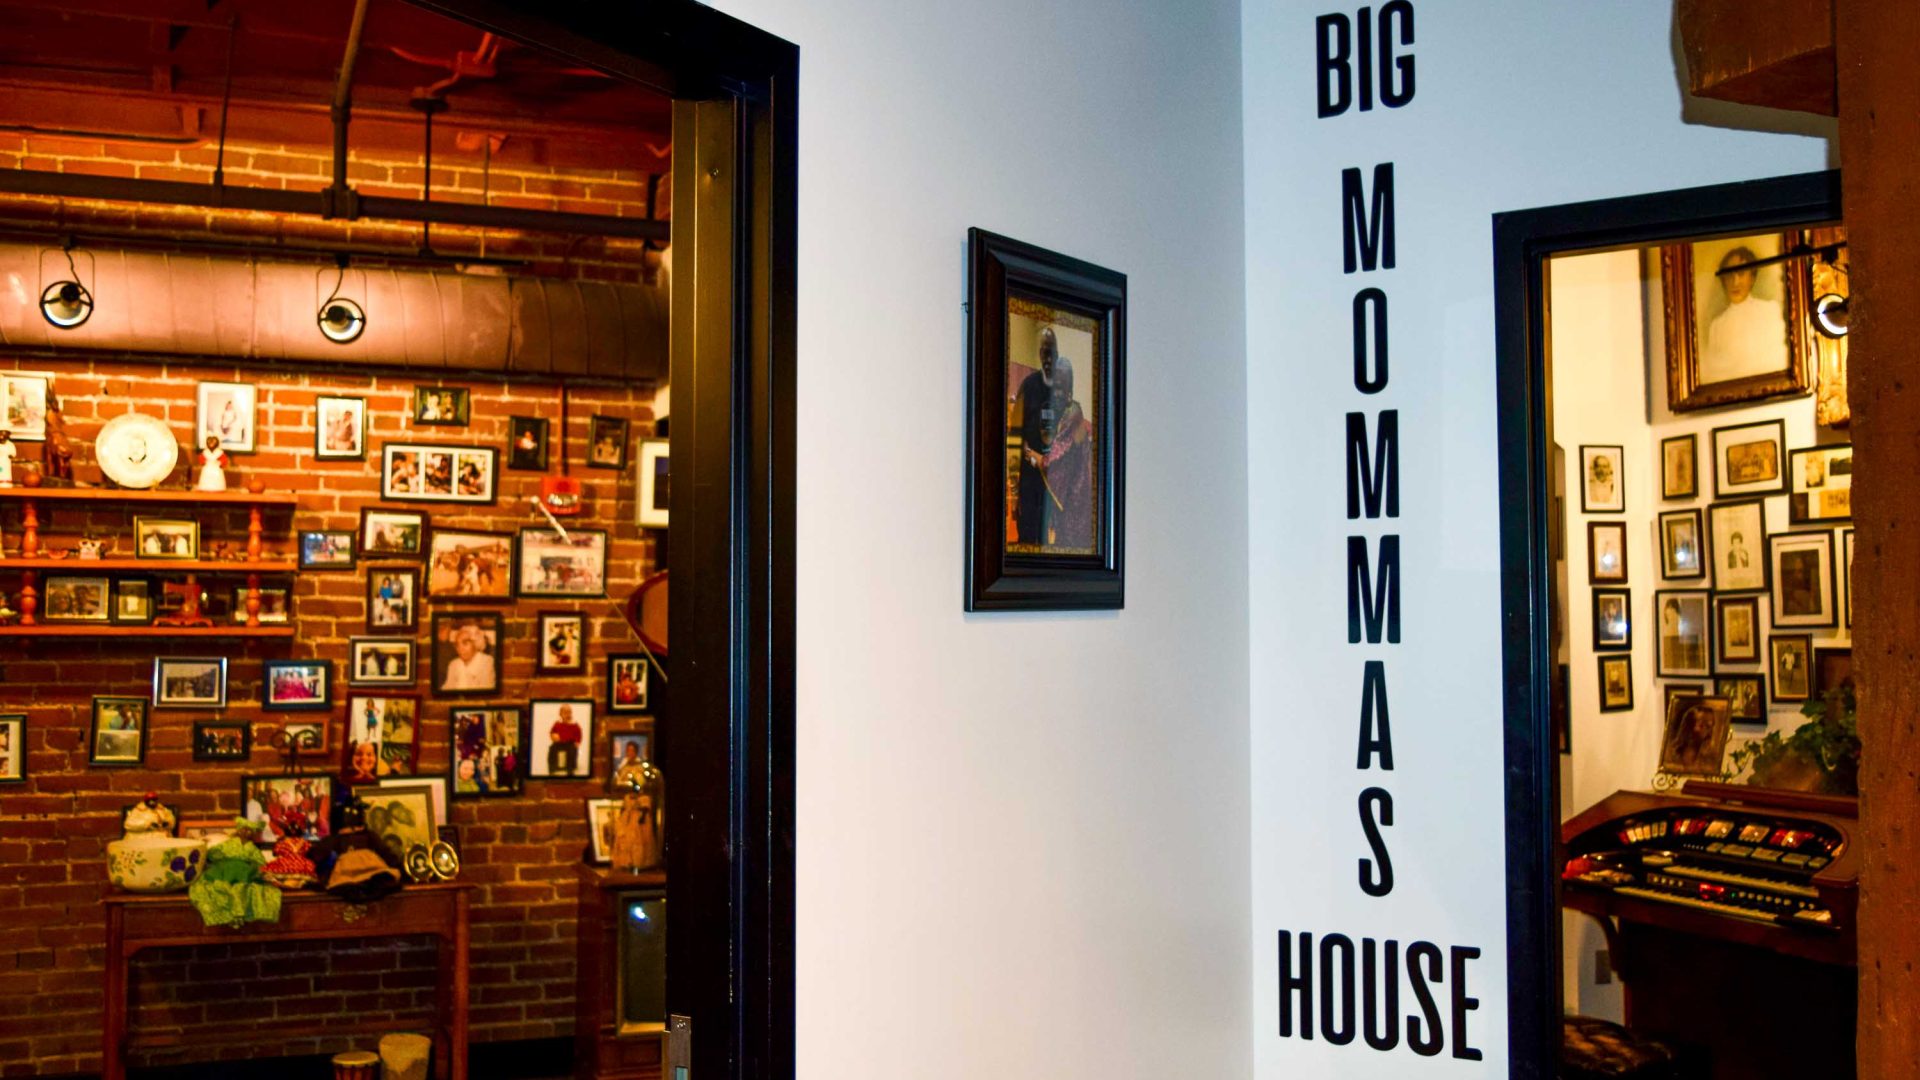 The wall says Big Mommas House and in the background you see museum pieces.